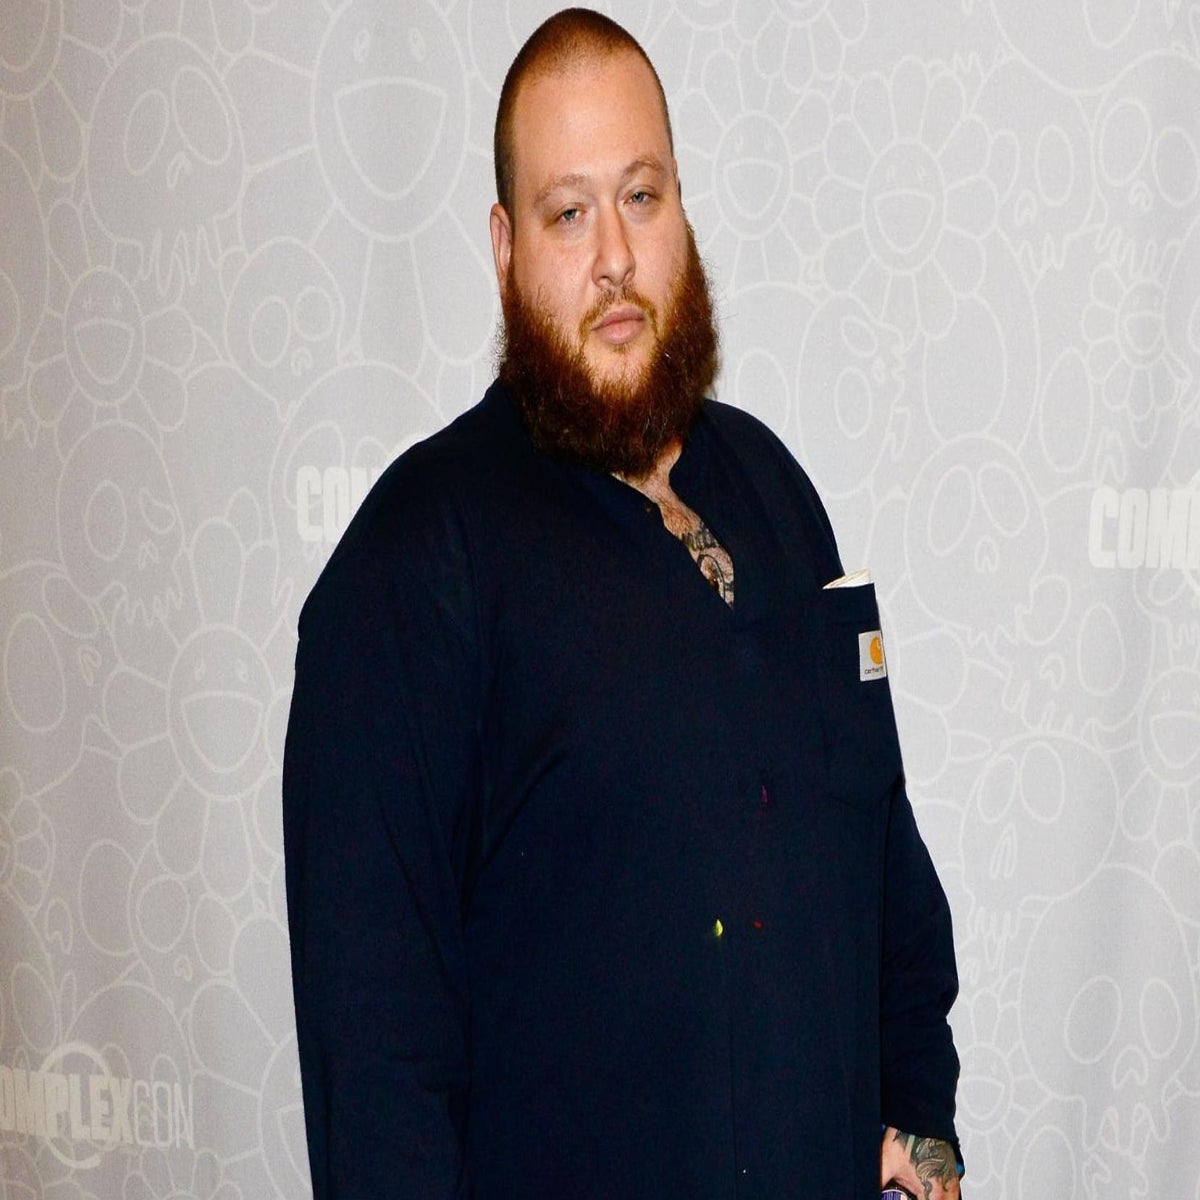 Action Bronson on Losing 130lbs 